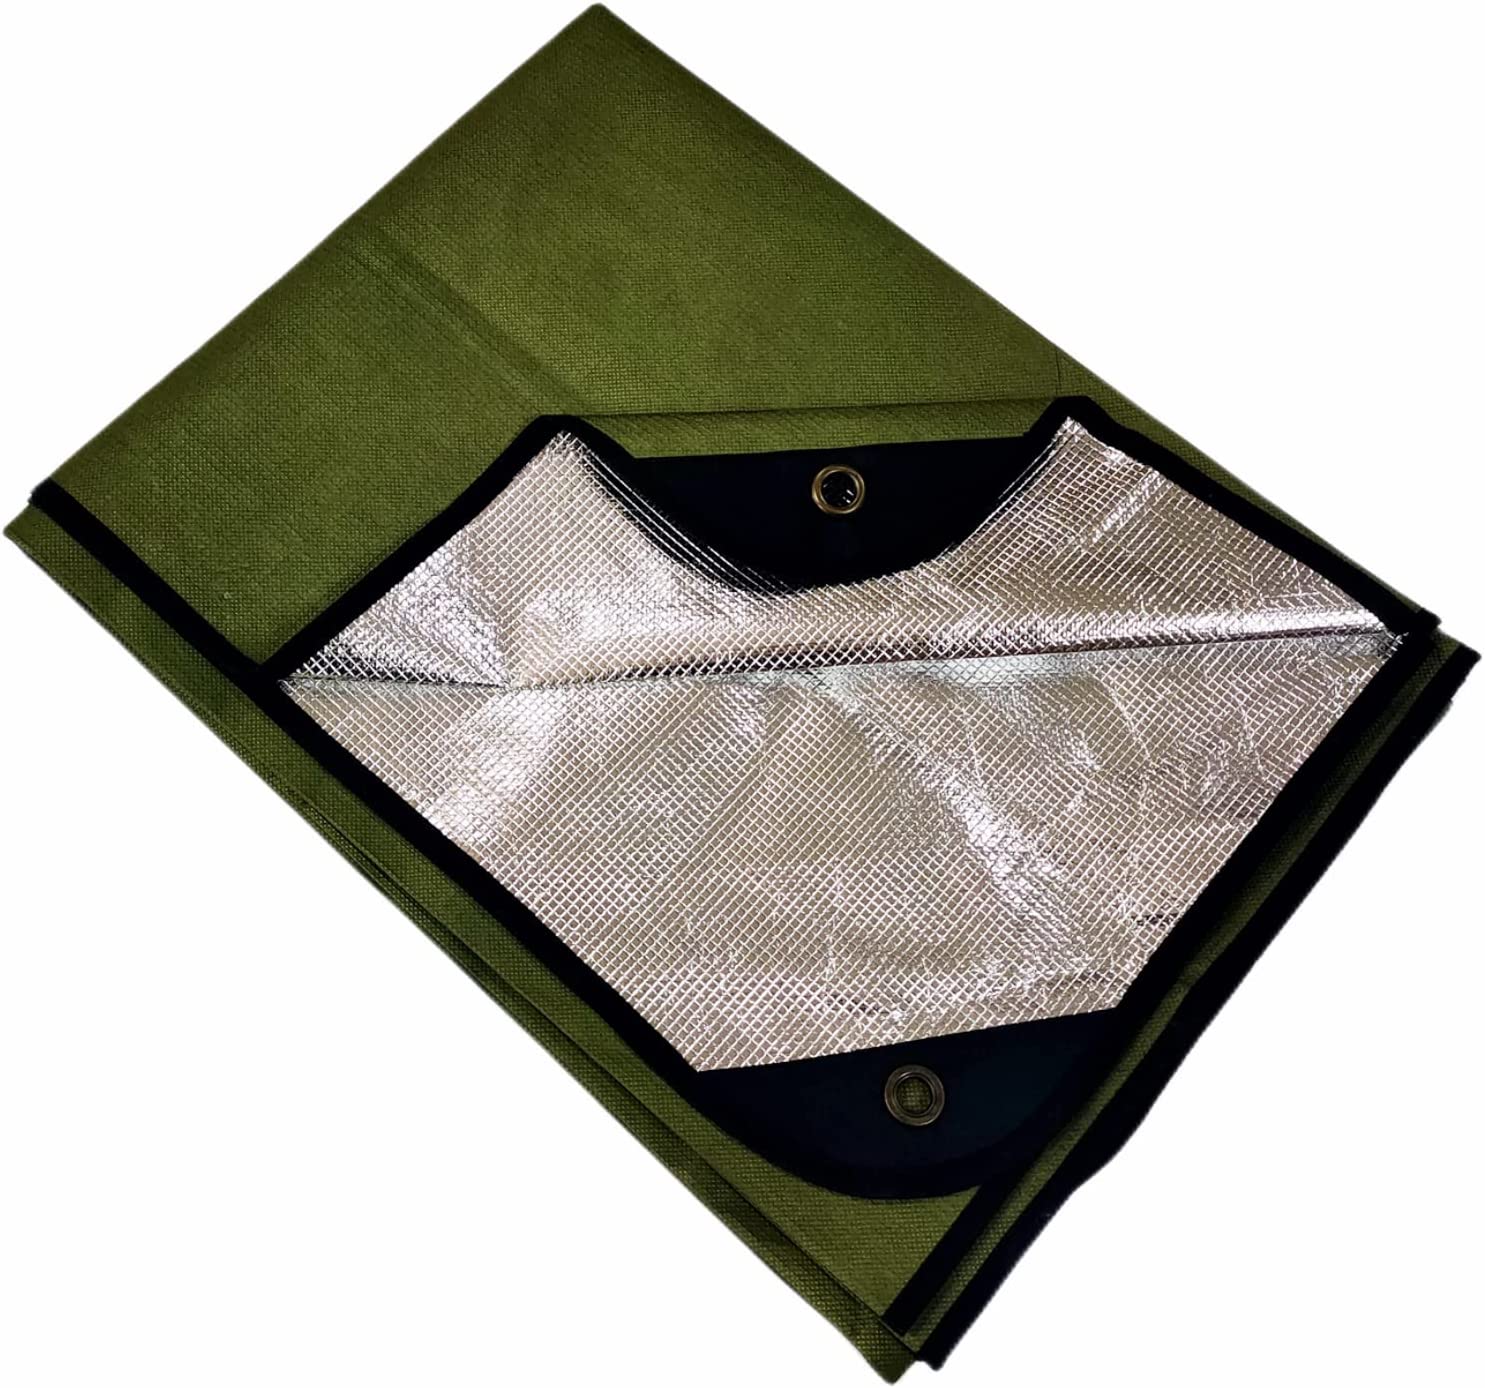 BESTHUNTINER Green Heavy Duty Survival Blanket -Multifunctional Insulated Thermal Reflective Shelter Tarp – 60" x 82" Reusable.